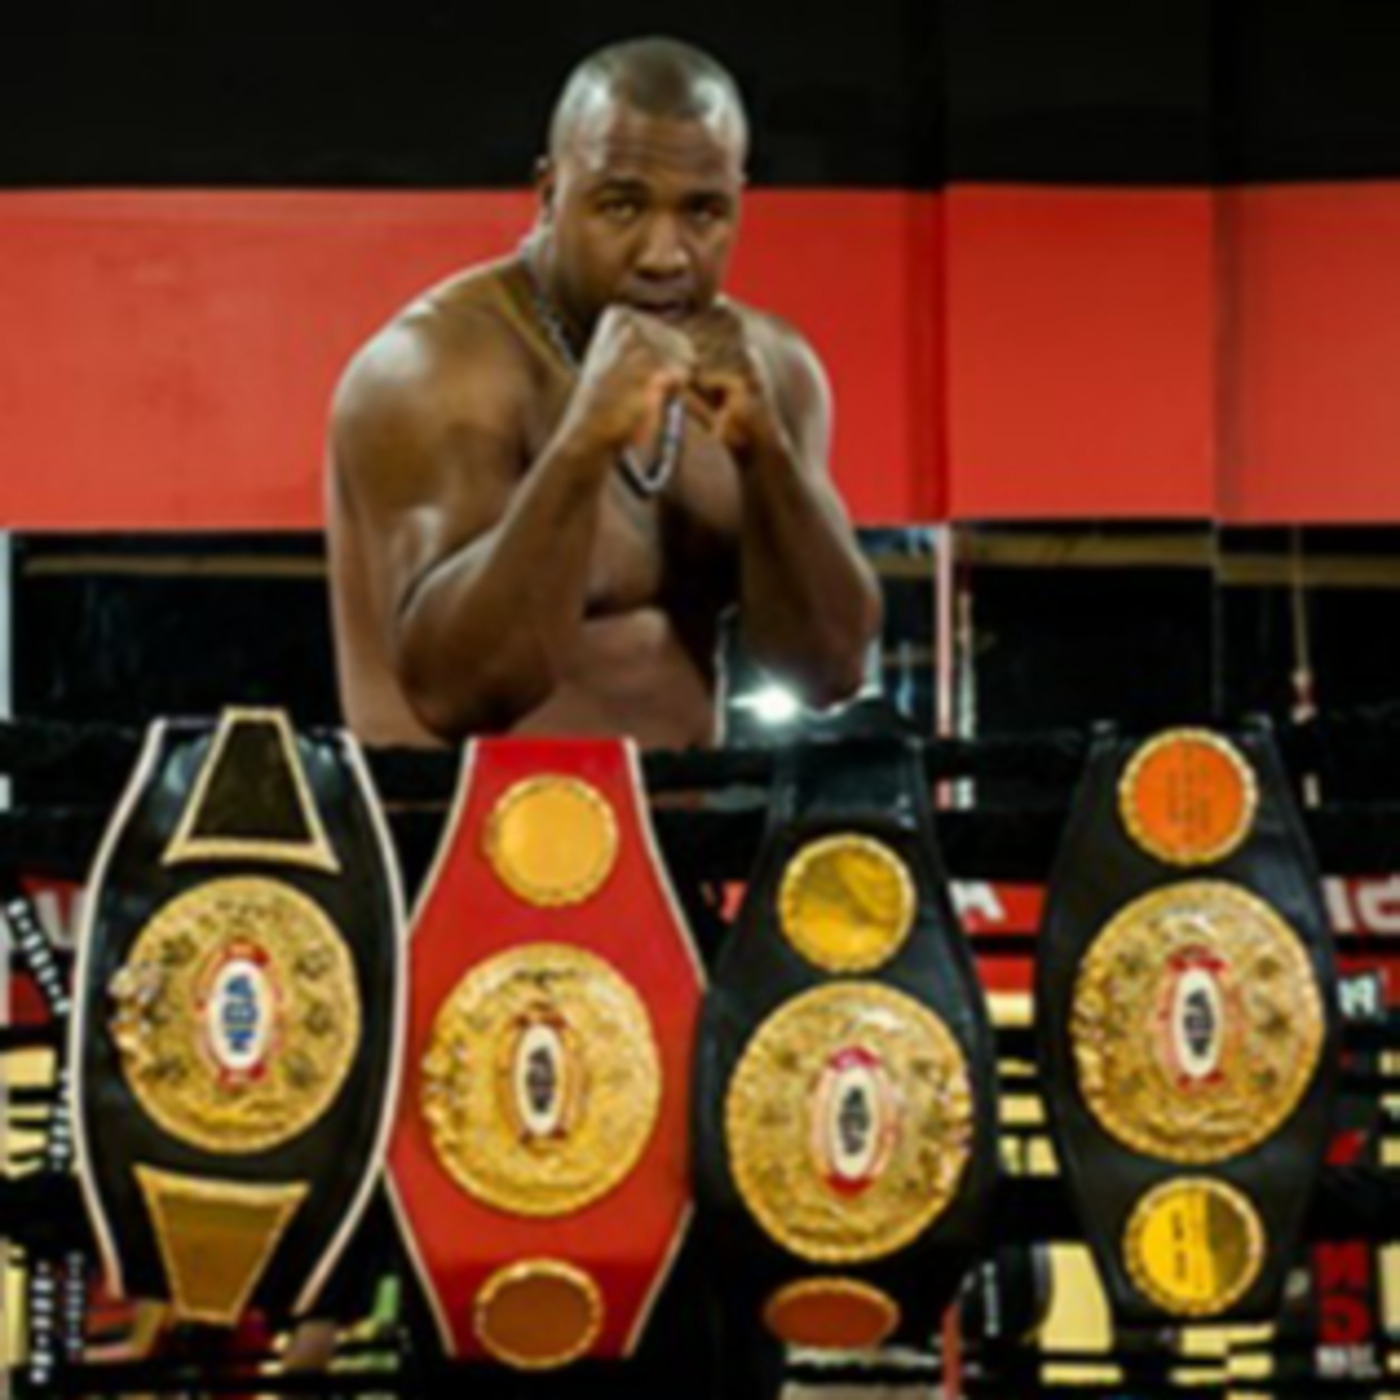 Episode 2395: China “The Dragon” Smith ~  Multi-X  National Boxing Heavy-Weight Champion & Positive Life Role Model